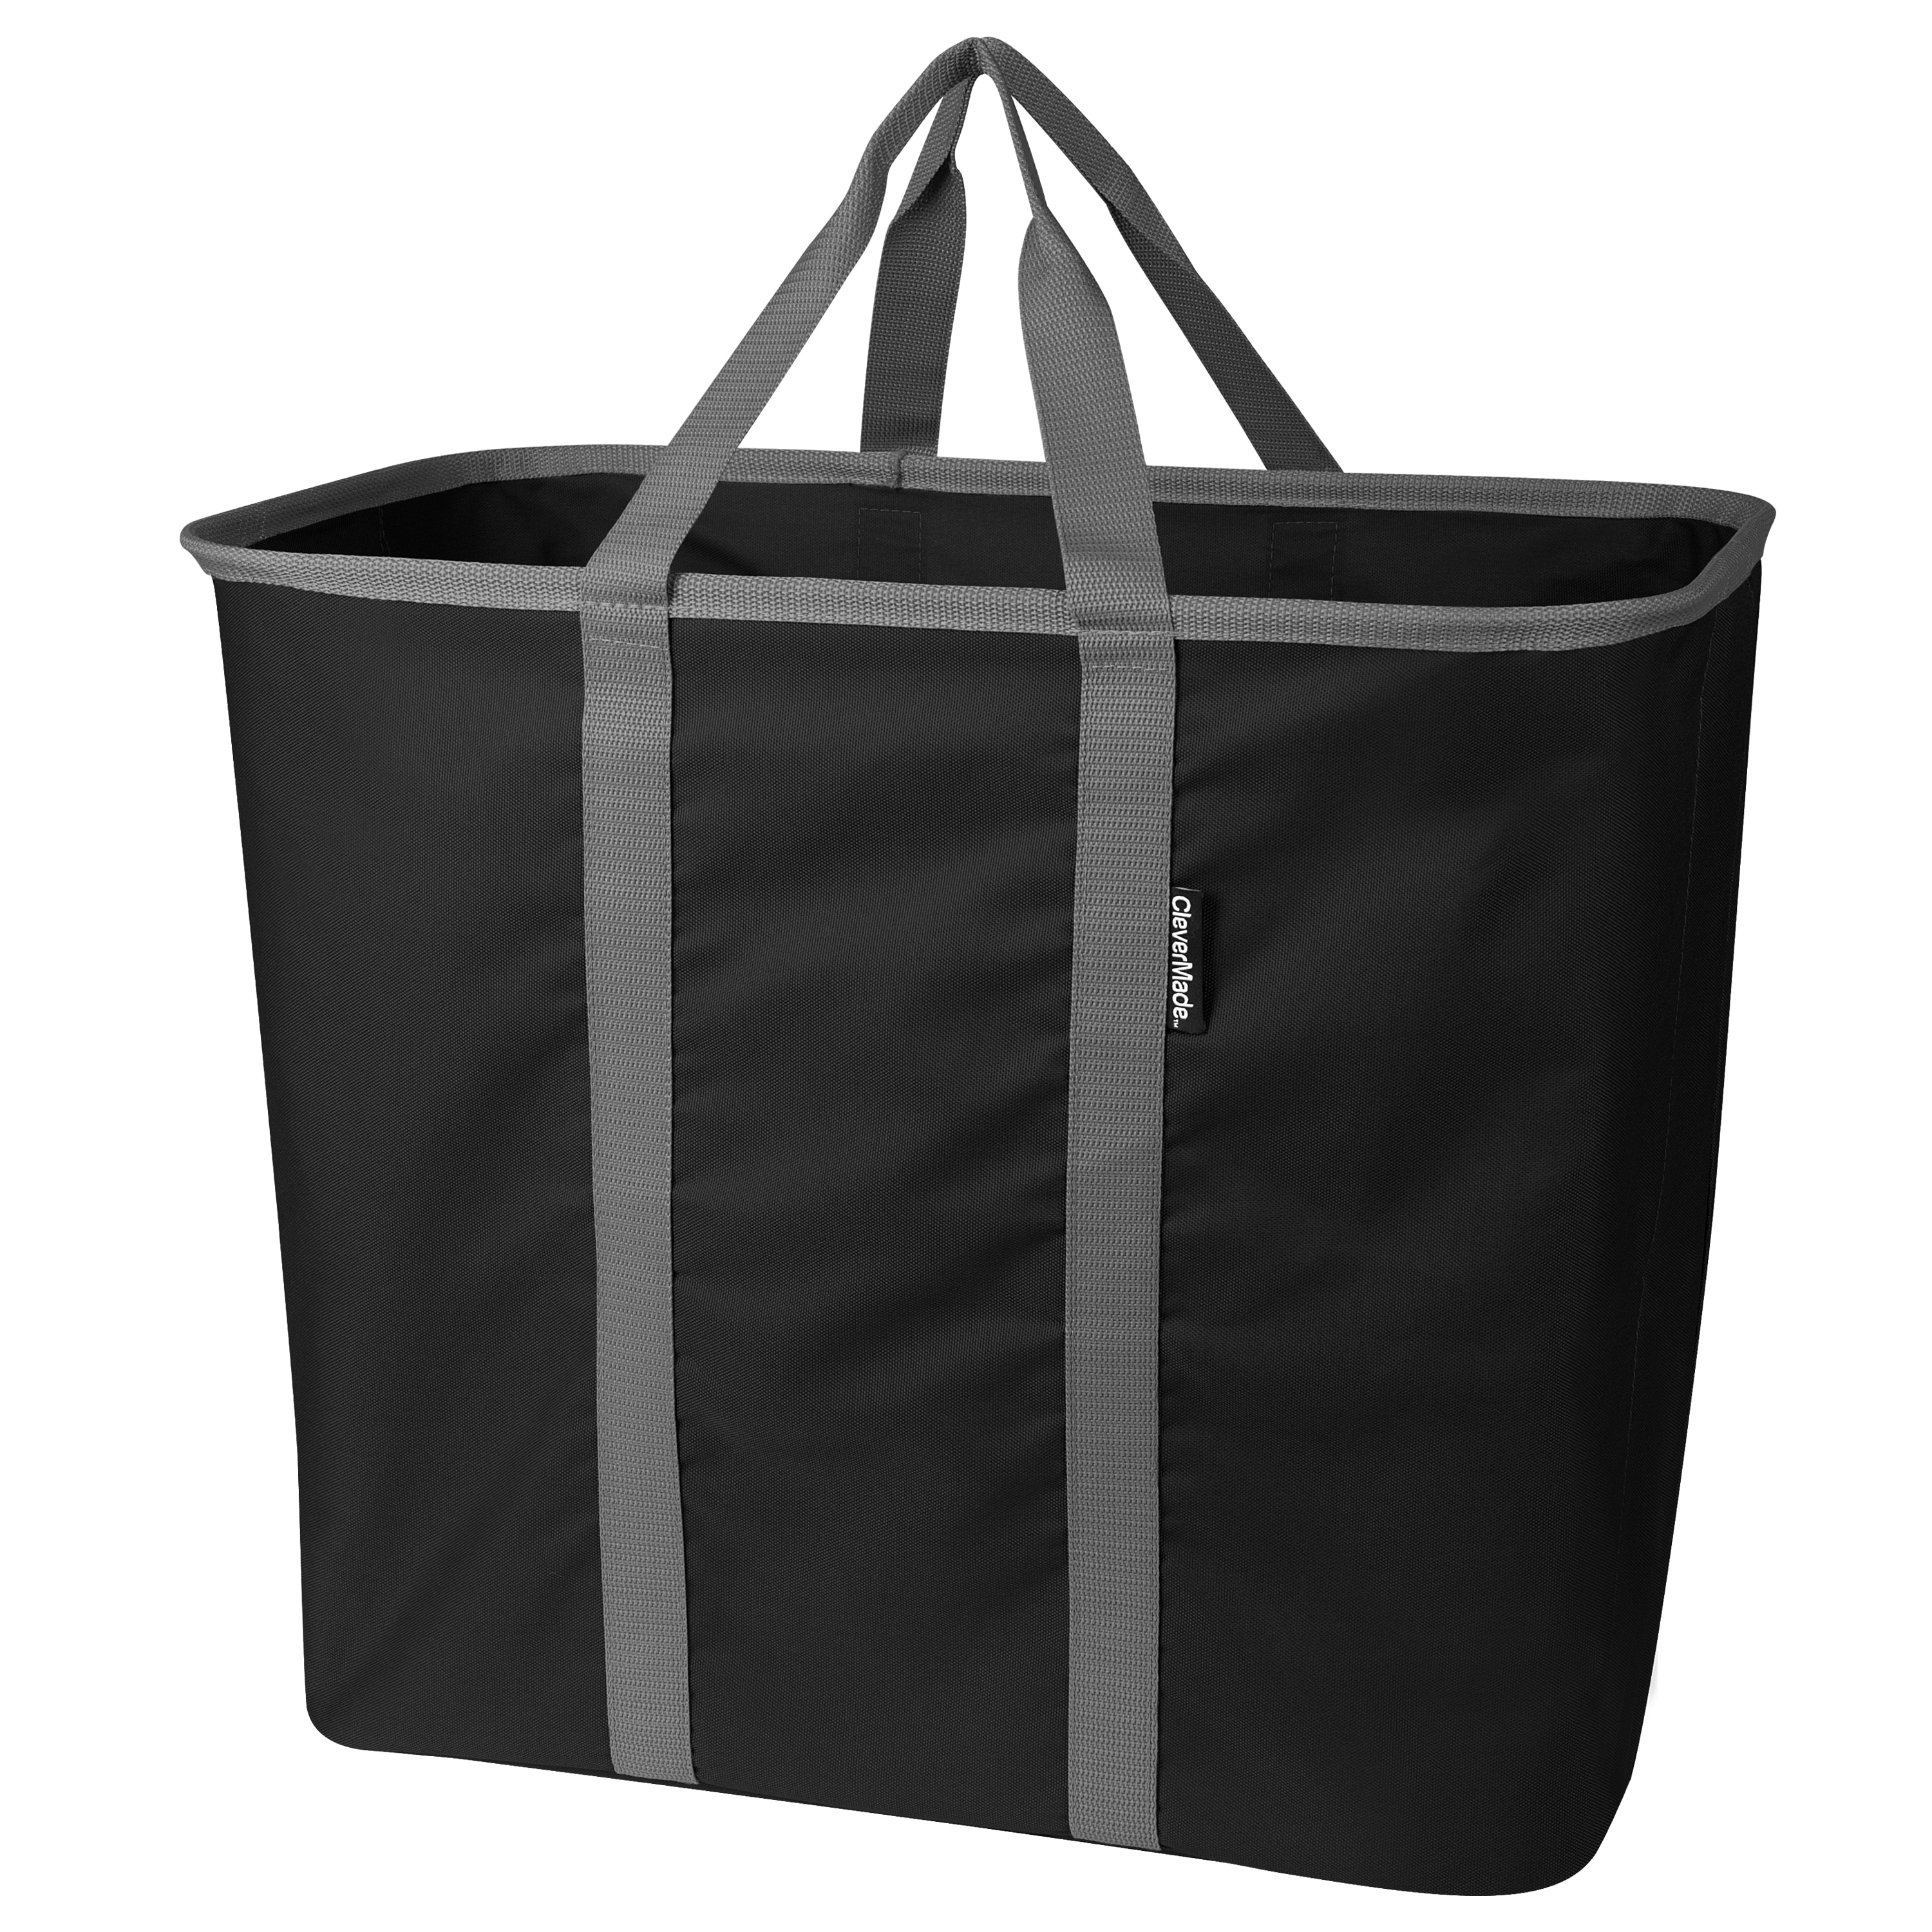 Fabric Foldable Collapsible Bag Recyclable Cloth Storage Laundry Canvas Basket 